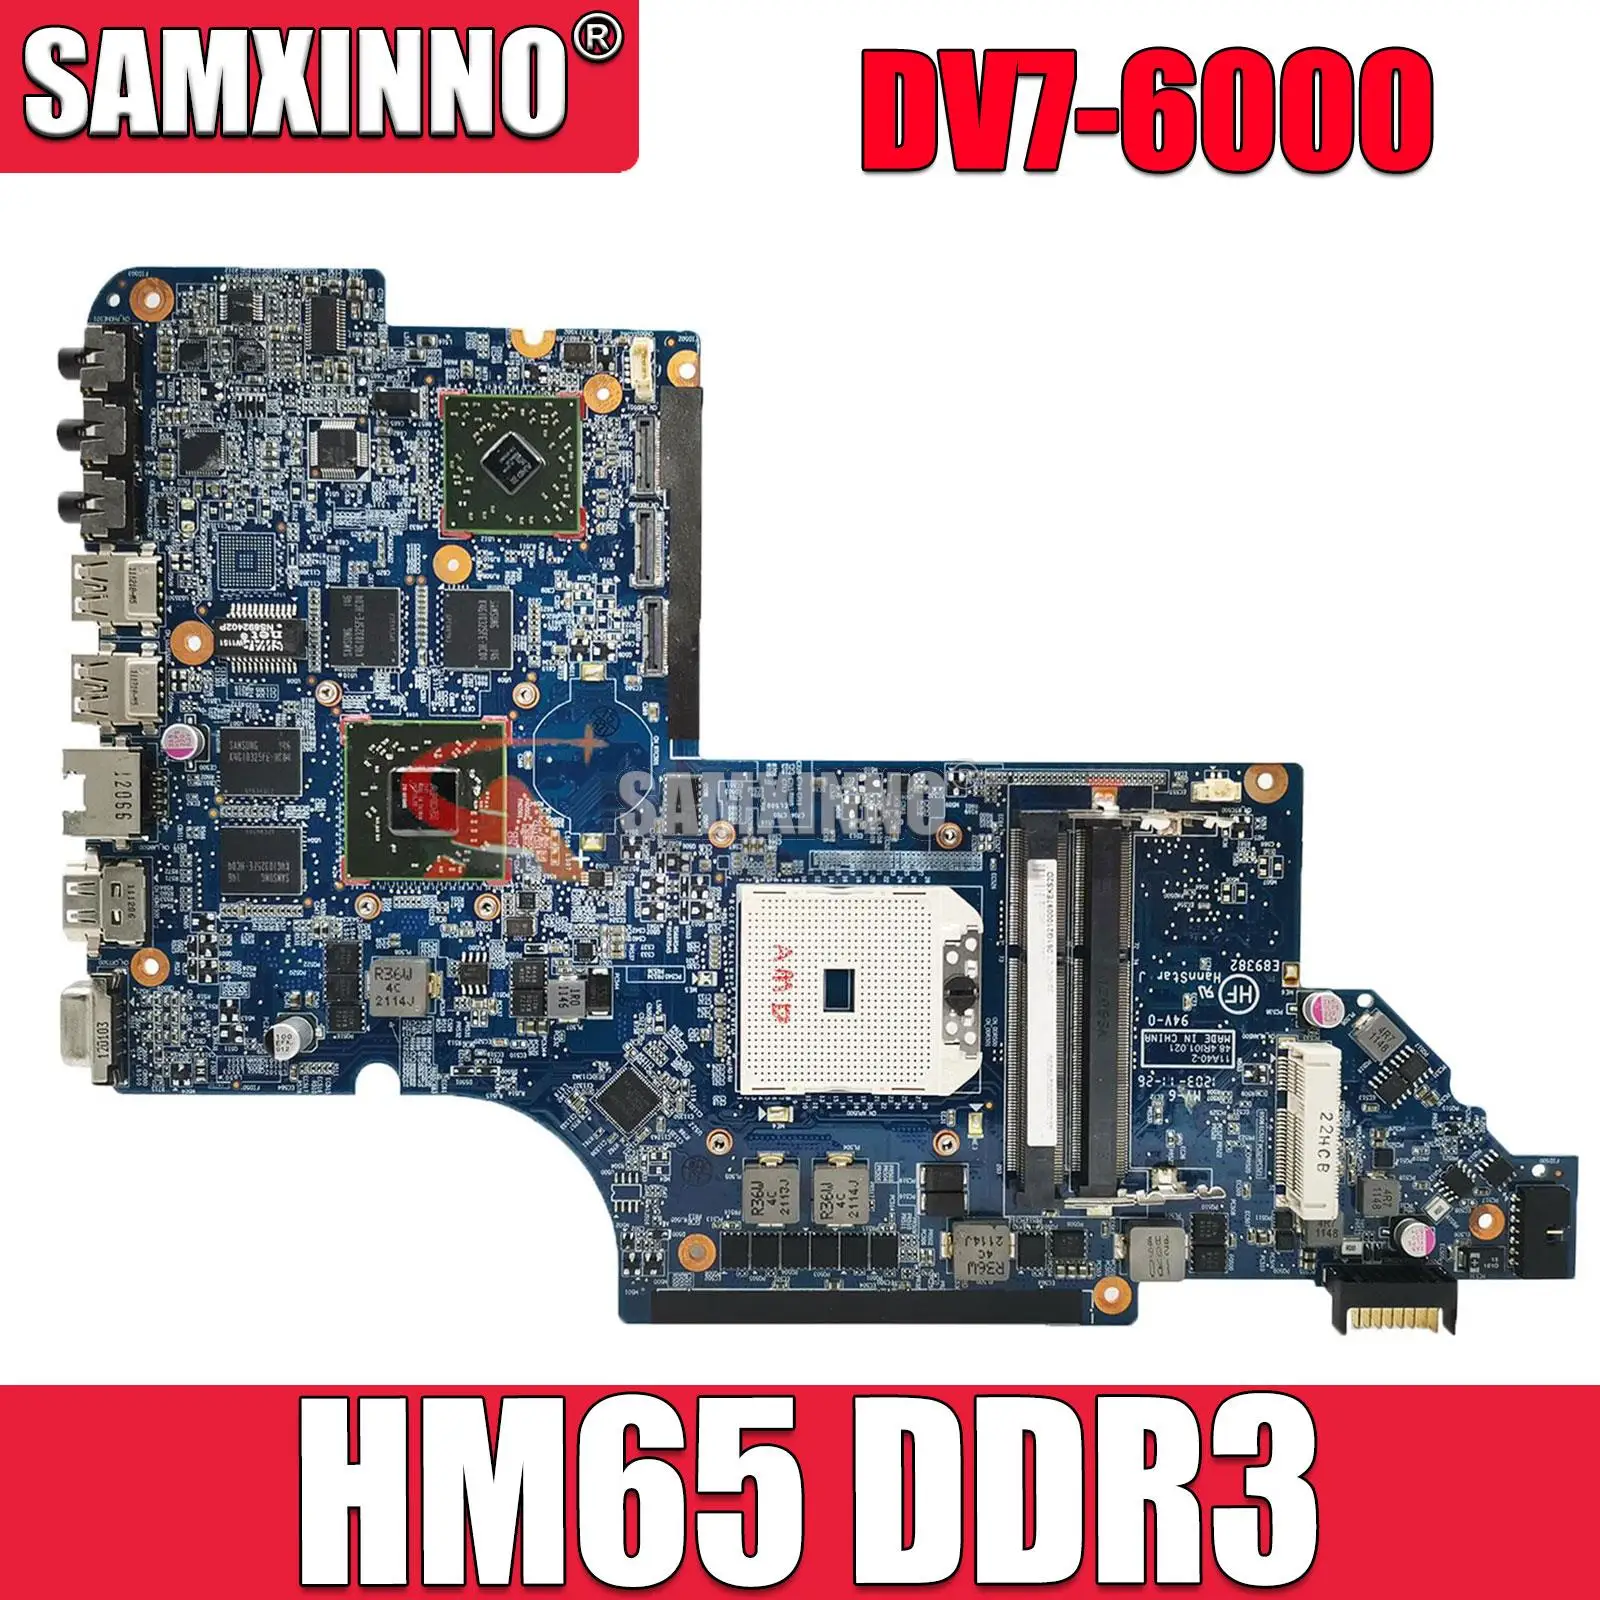 

For HP Pavillion DV7-6000 Notebook Mainboard HM65 DDR3 Laptop motherboard 100% Tested Fast Ship 665993-001 659093-501 659095-601